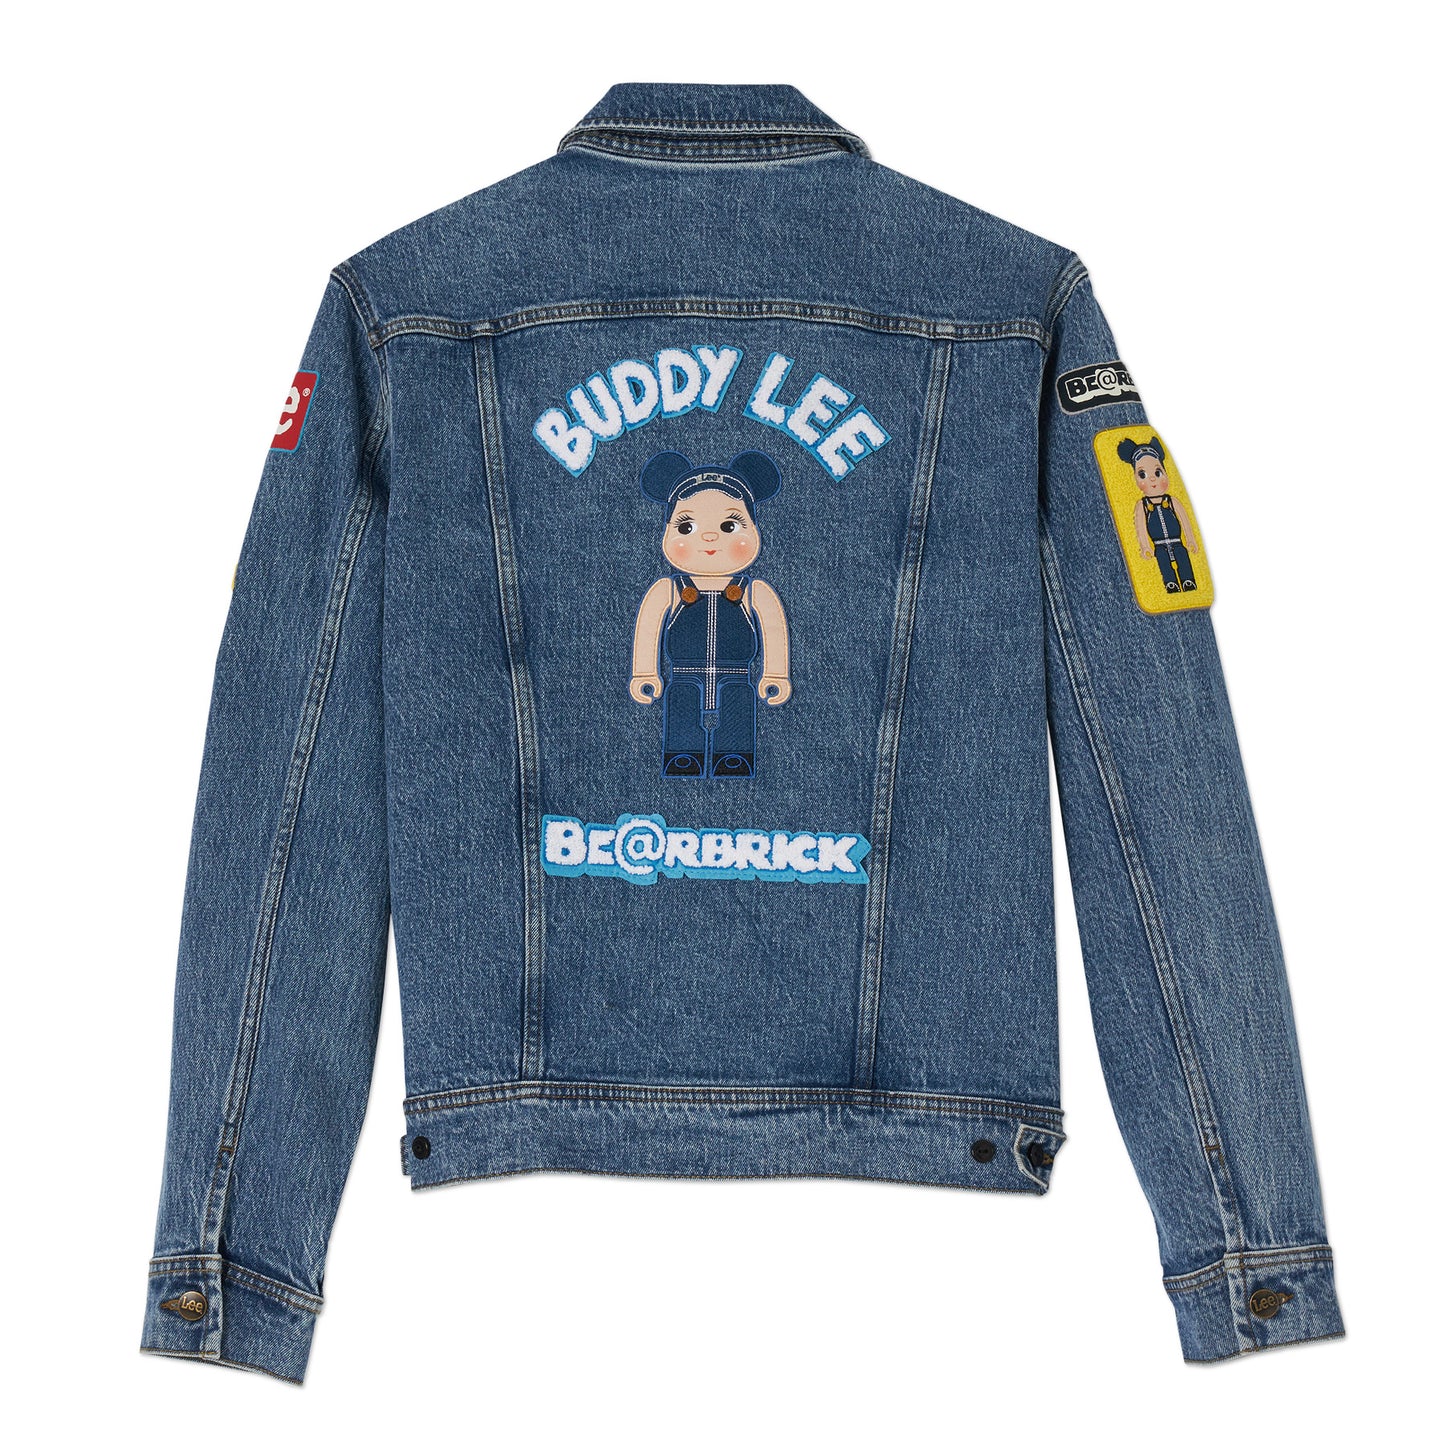 Lee x BE@RBRICK Denim Jacket with Patches (Denim Blue)